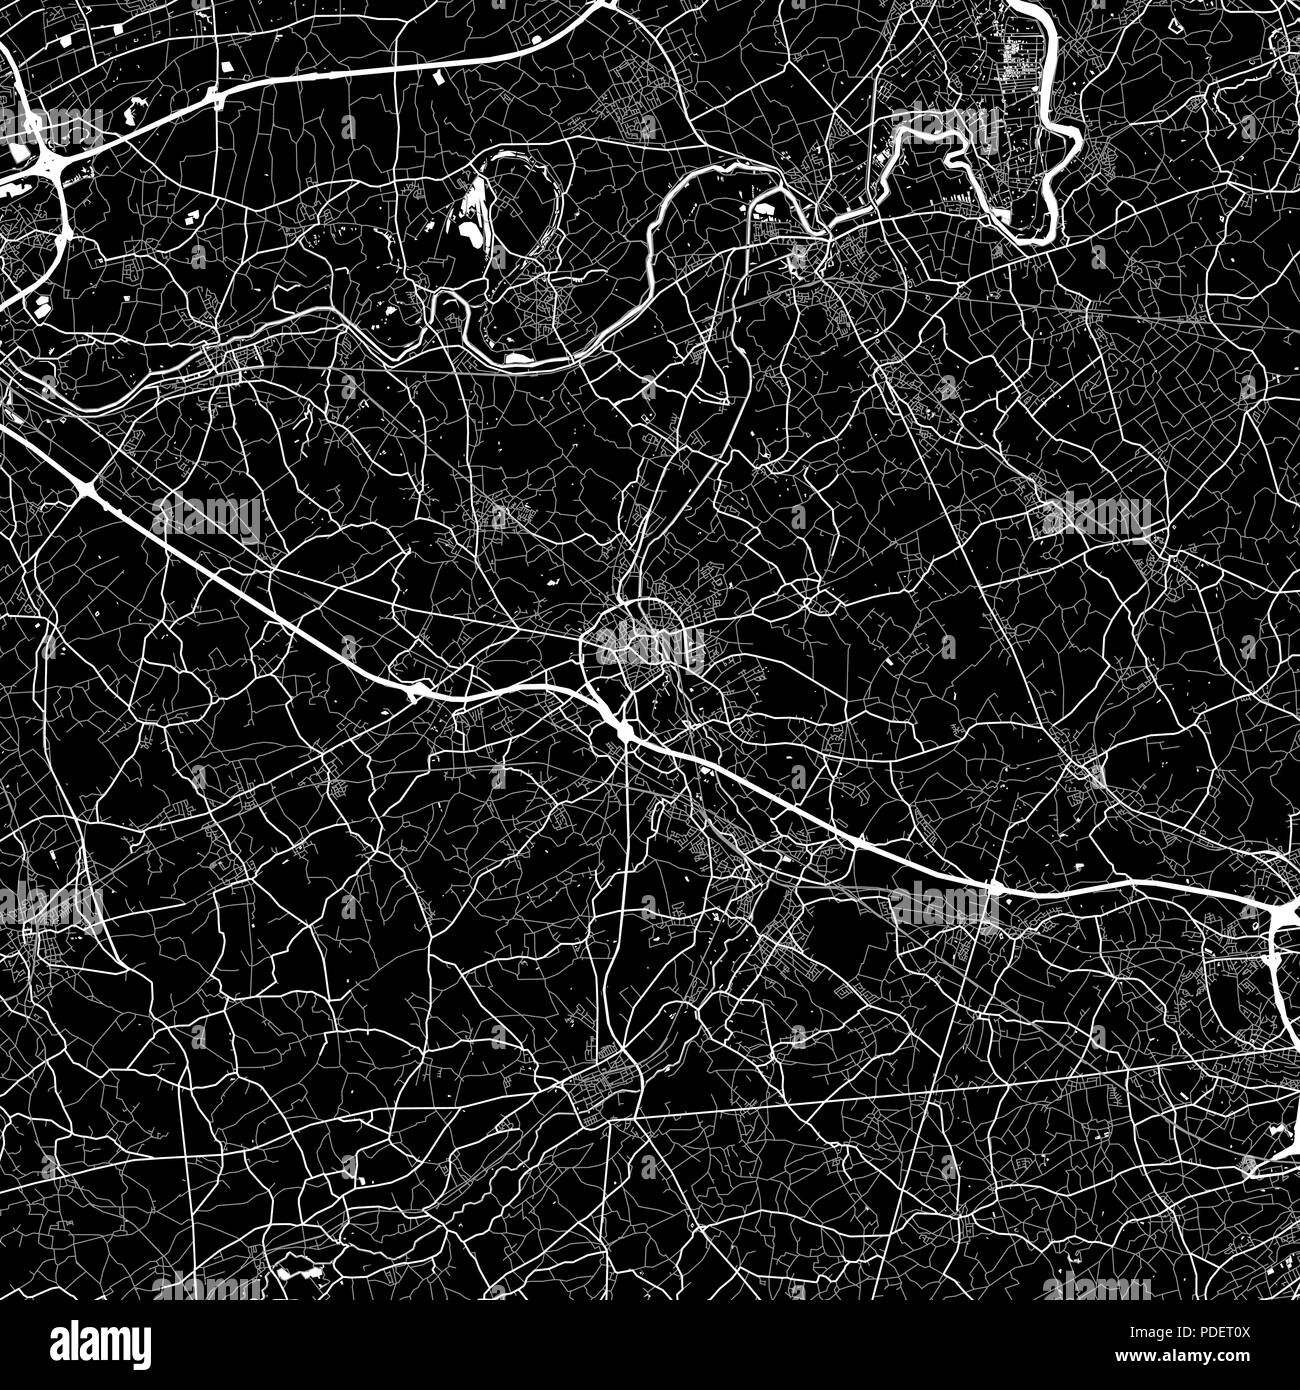 Area map of  Aalst, Belgium. Dark background version for infographic and marketing. This map of  Aalst, Flemish Region, contains streets, waterways an Stock Vector